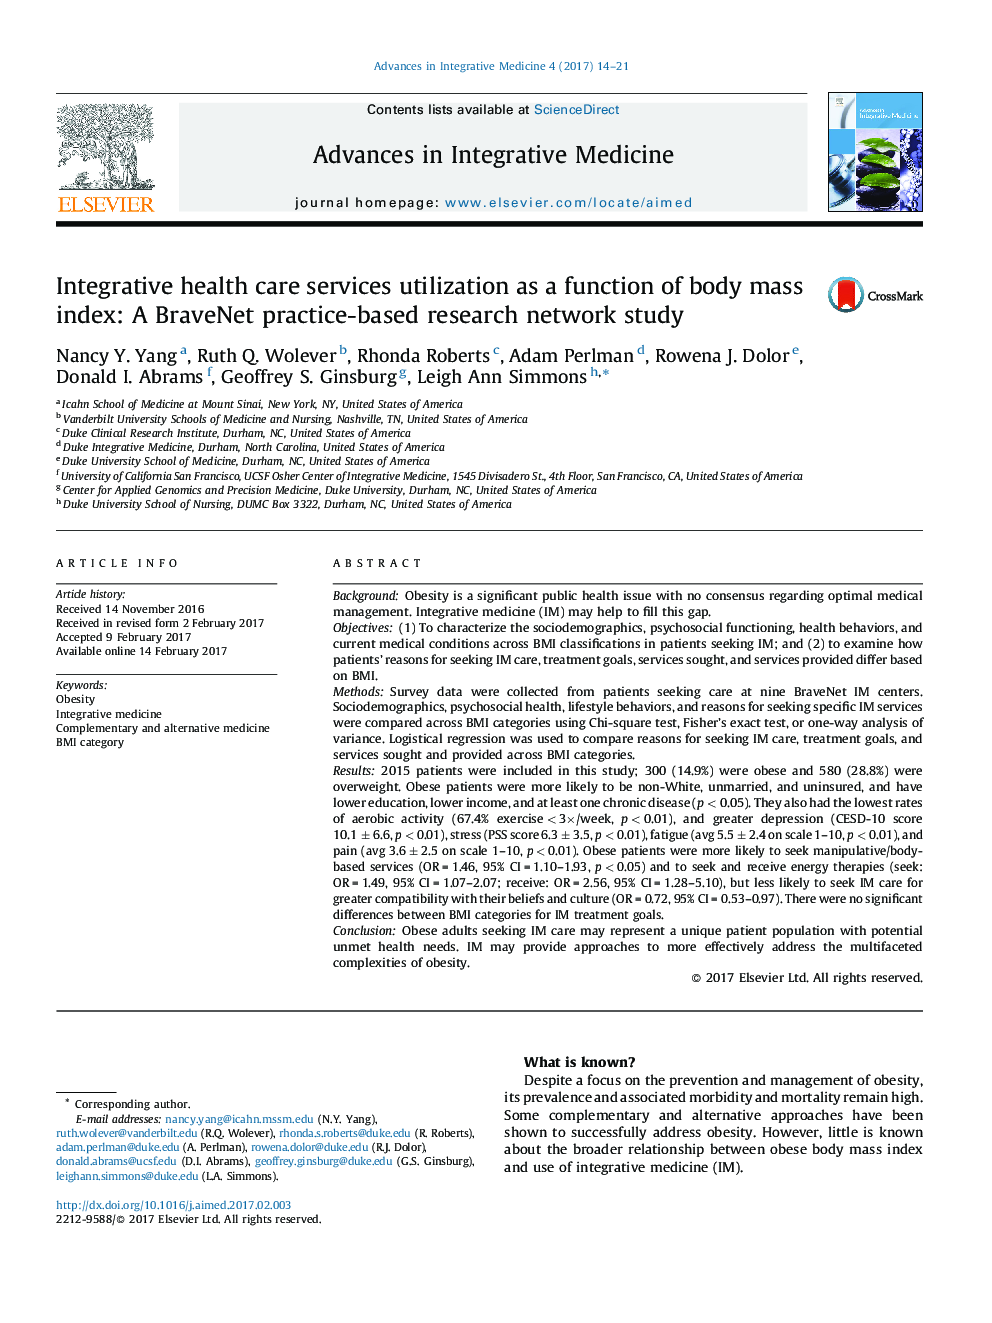 Integrative health care services utilization as a function of body mass index: A BraveNet practice-based research network study